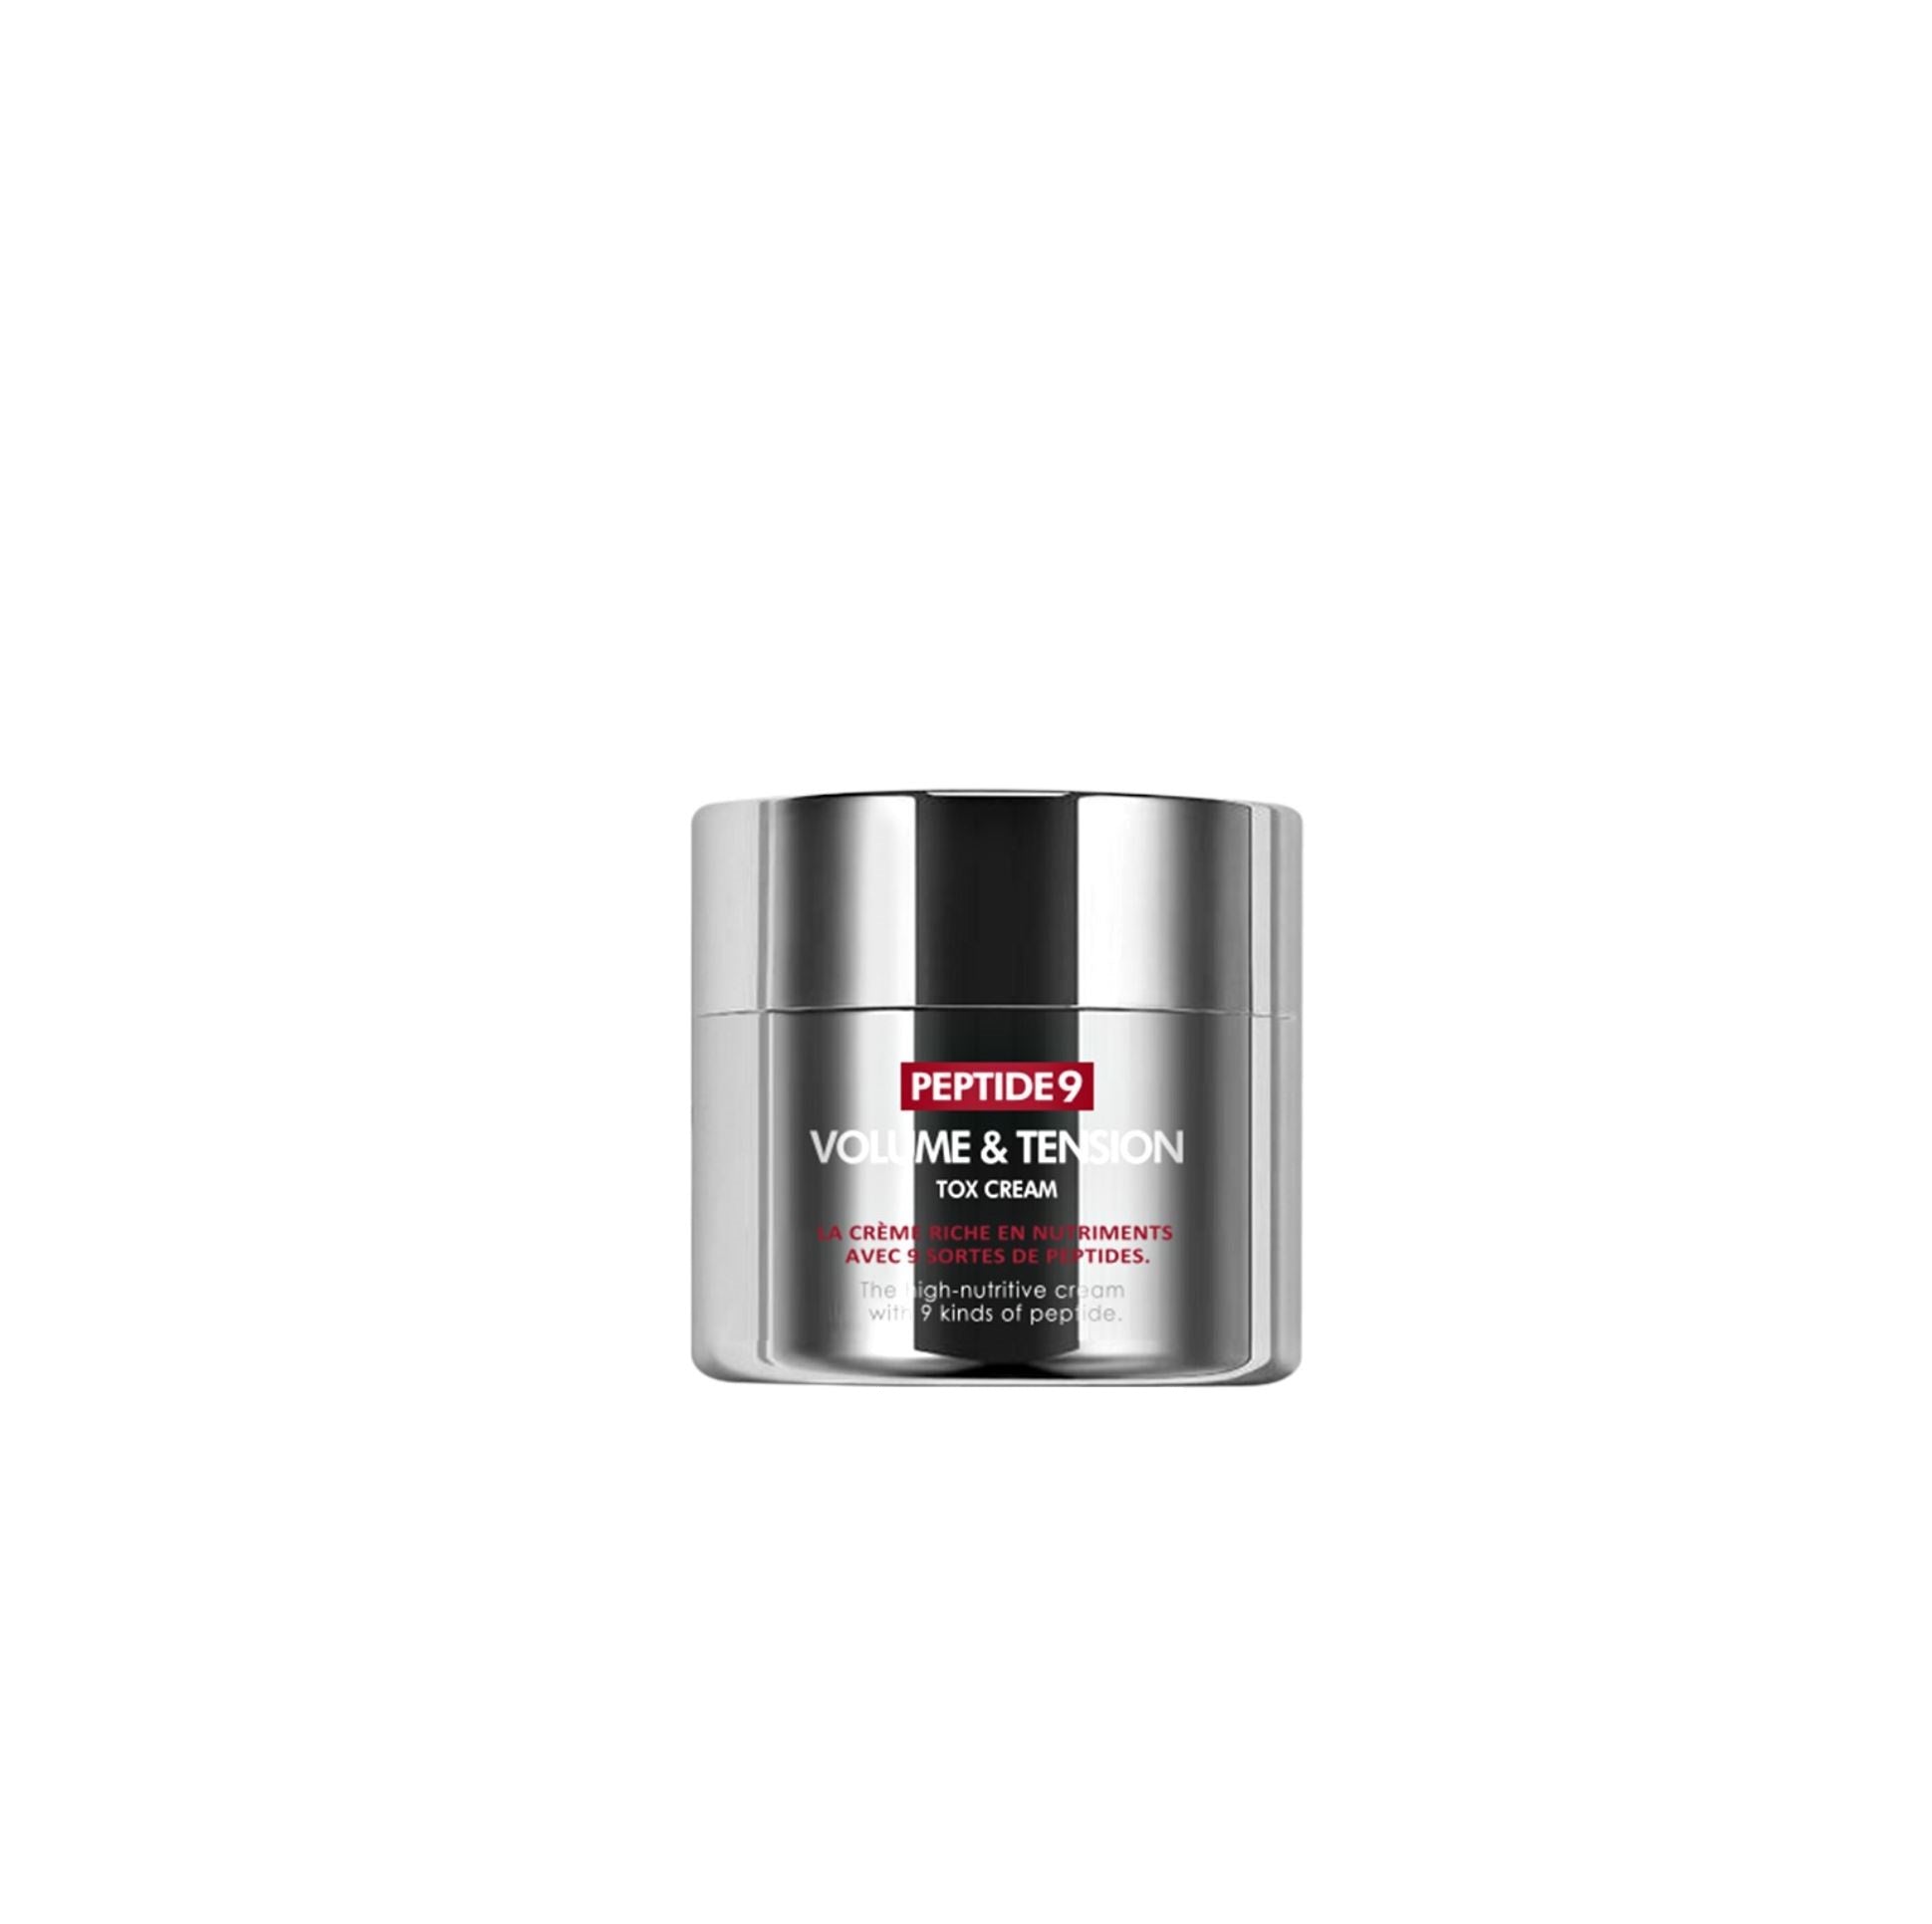 Peptide 9 Volume and Tension Tox Cream Pro (Renewal)50g